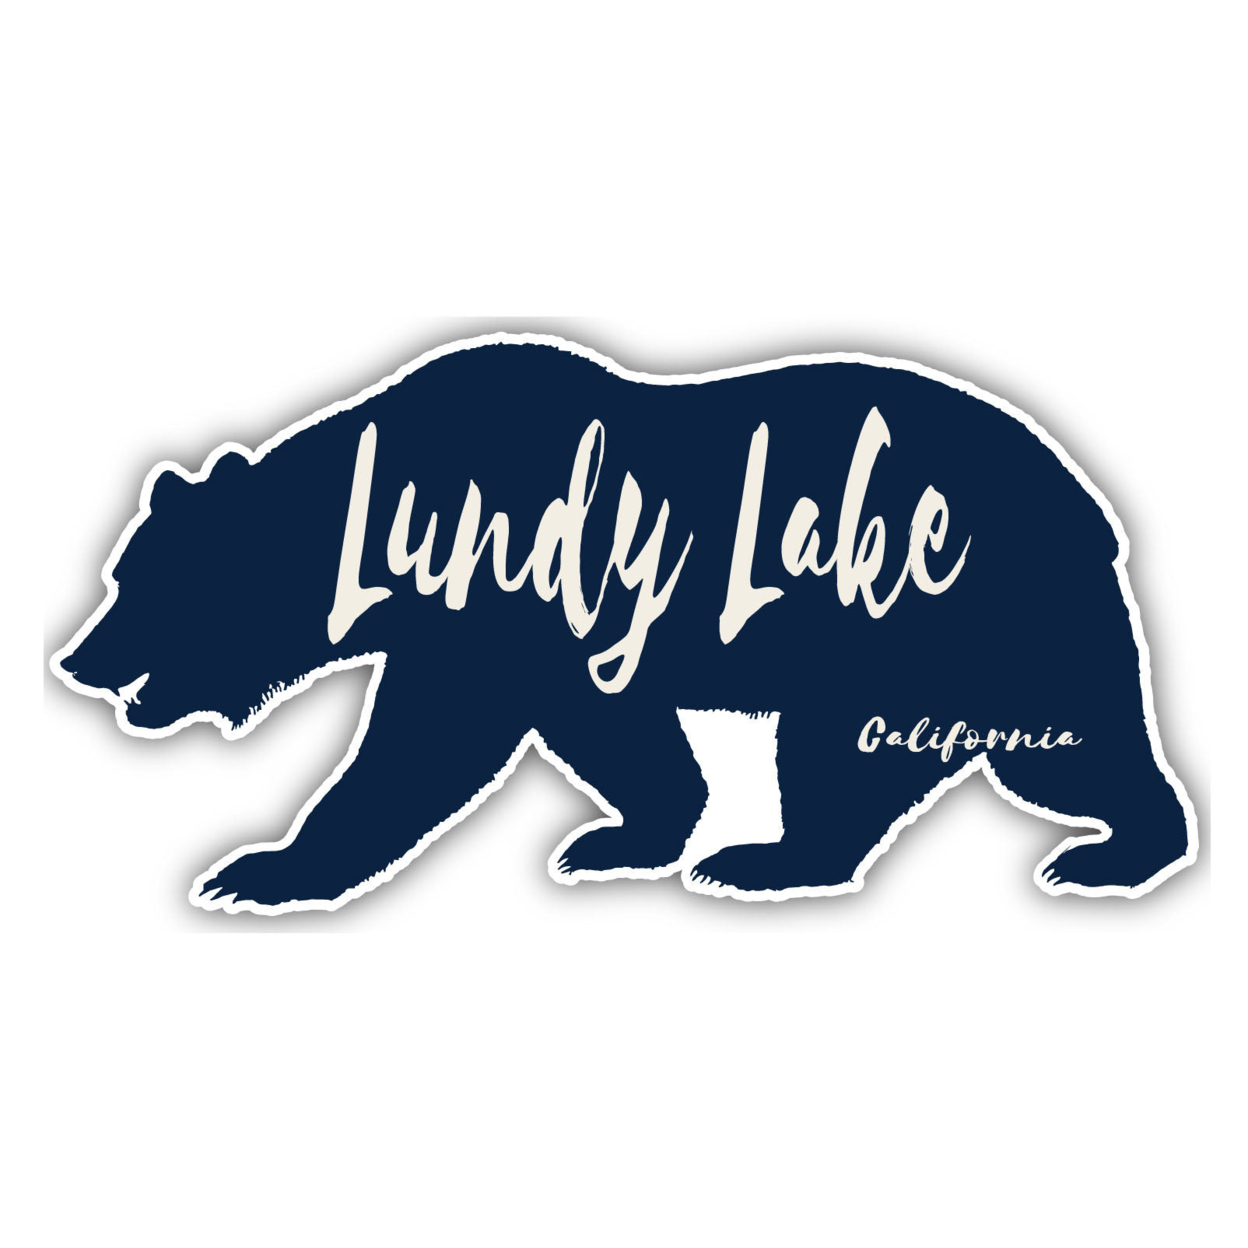 Lundy Lake California Souvenir Decorative Stickers (Choose Theme And Size) - 4-Inch, Camp Life